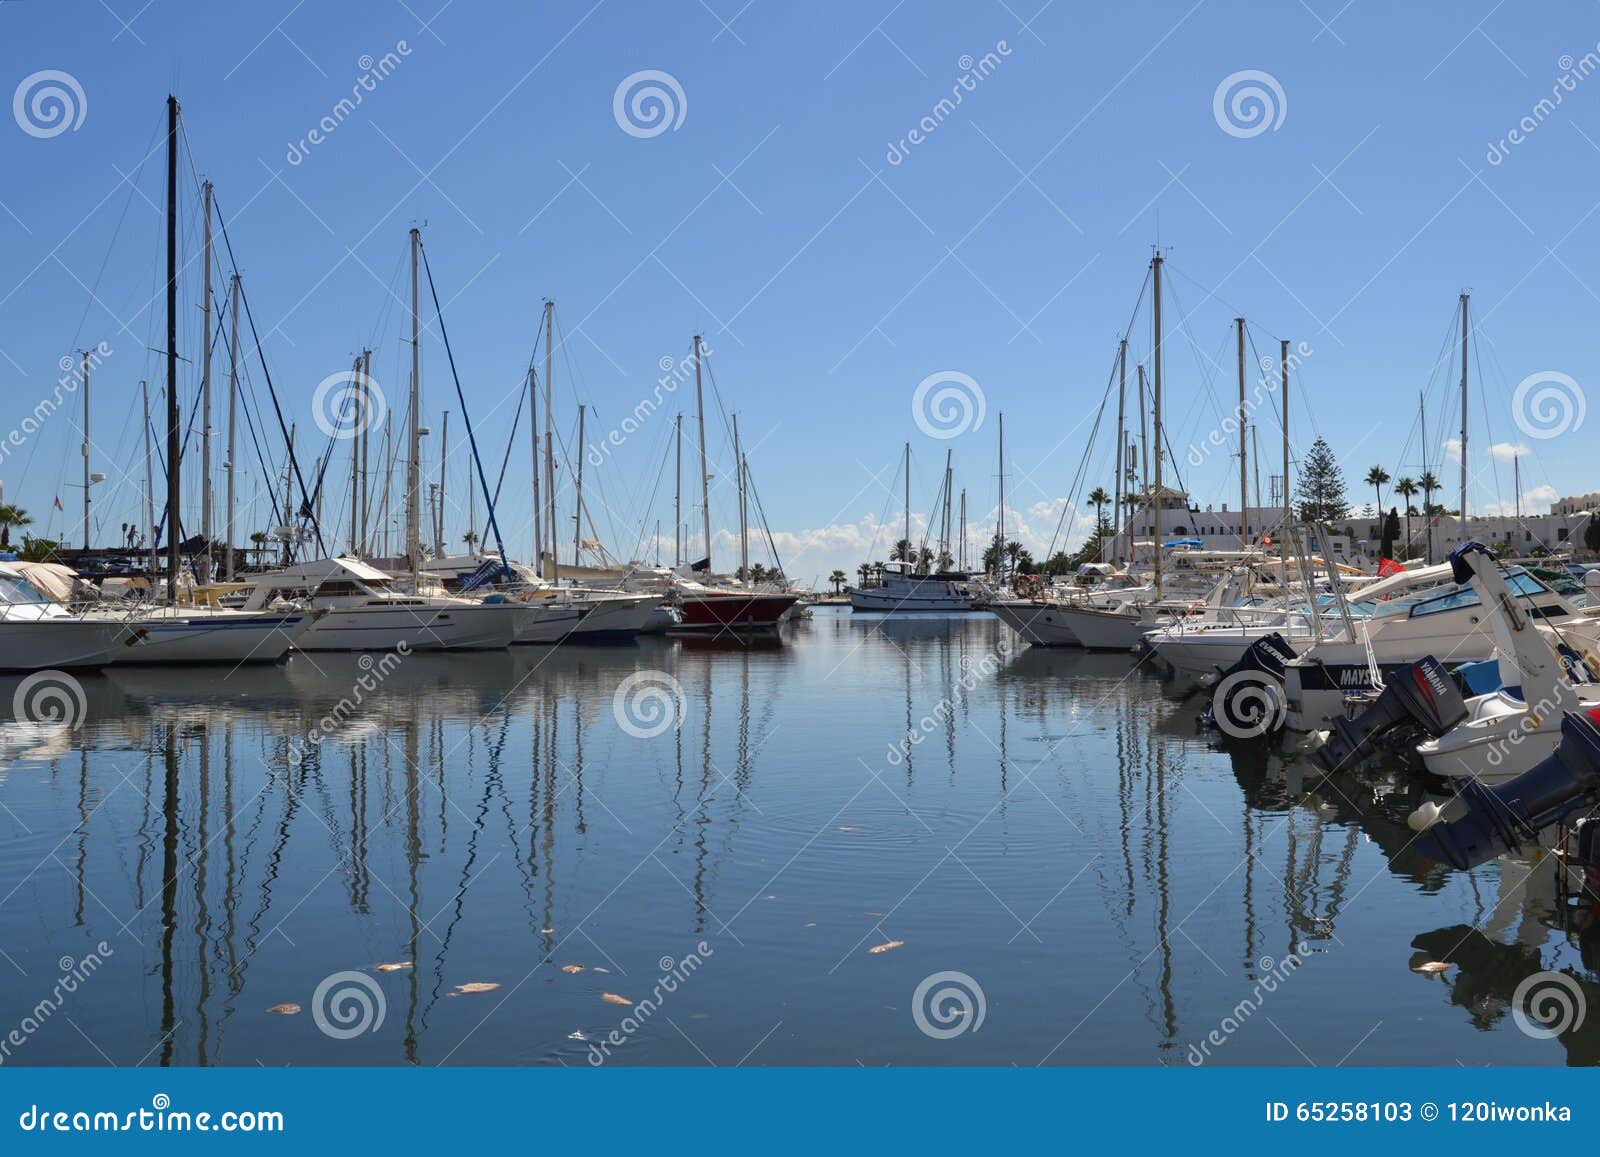 Port in Tunis editorial stock photo. Image of tunis, water - 65258103